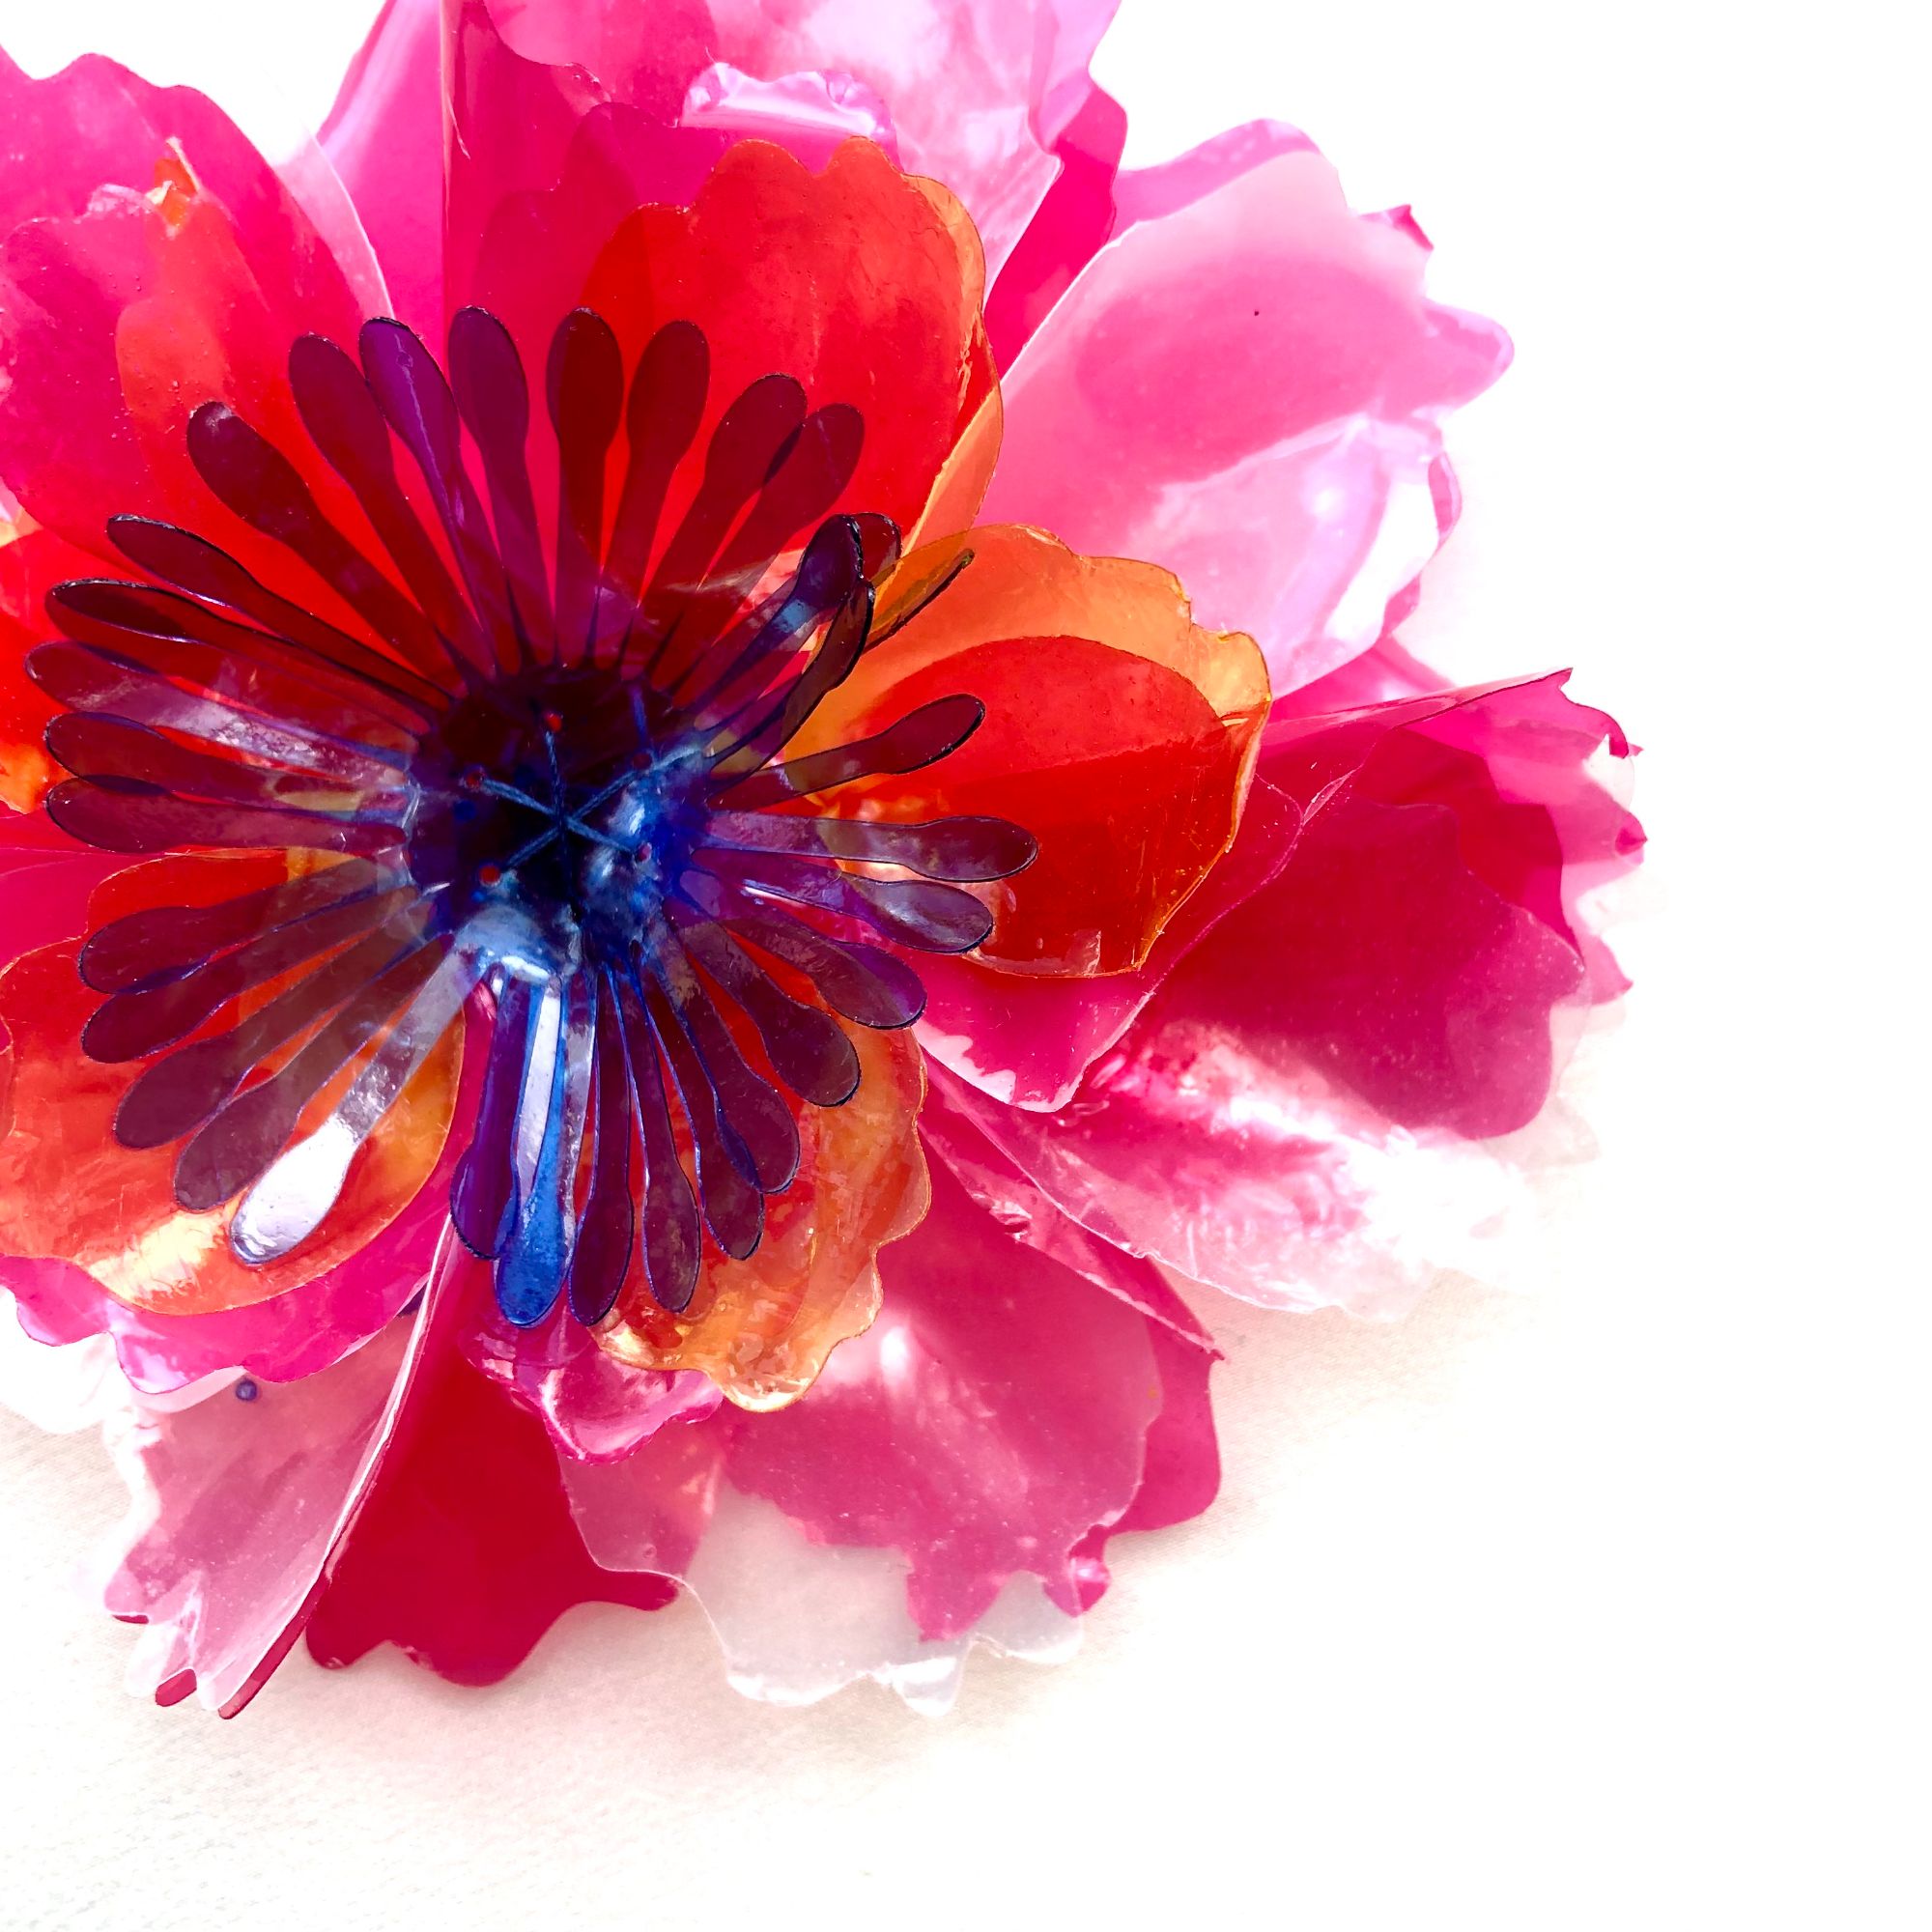 Flower made from bioplastic sequins in pink, yellow and blue